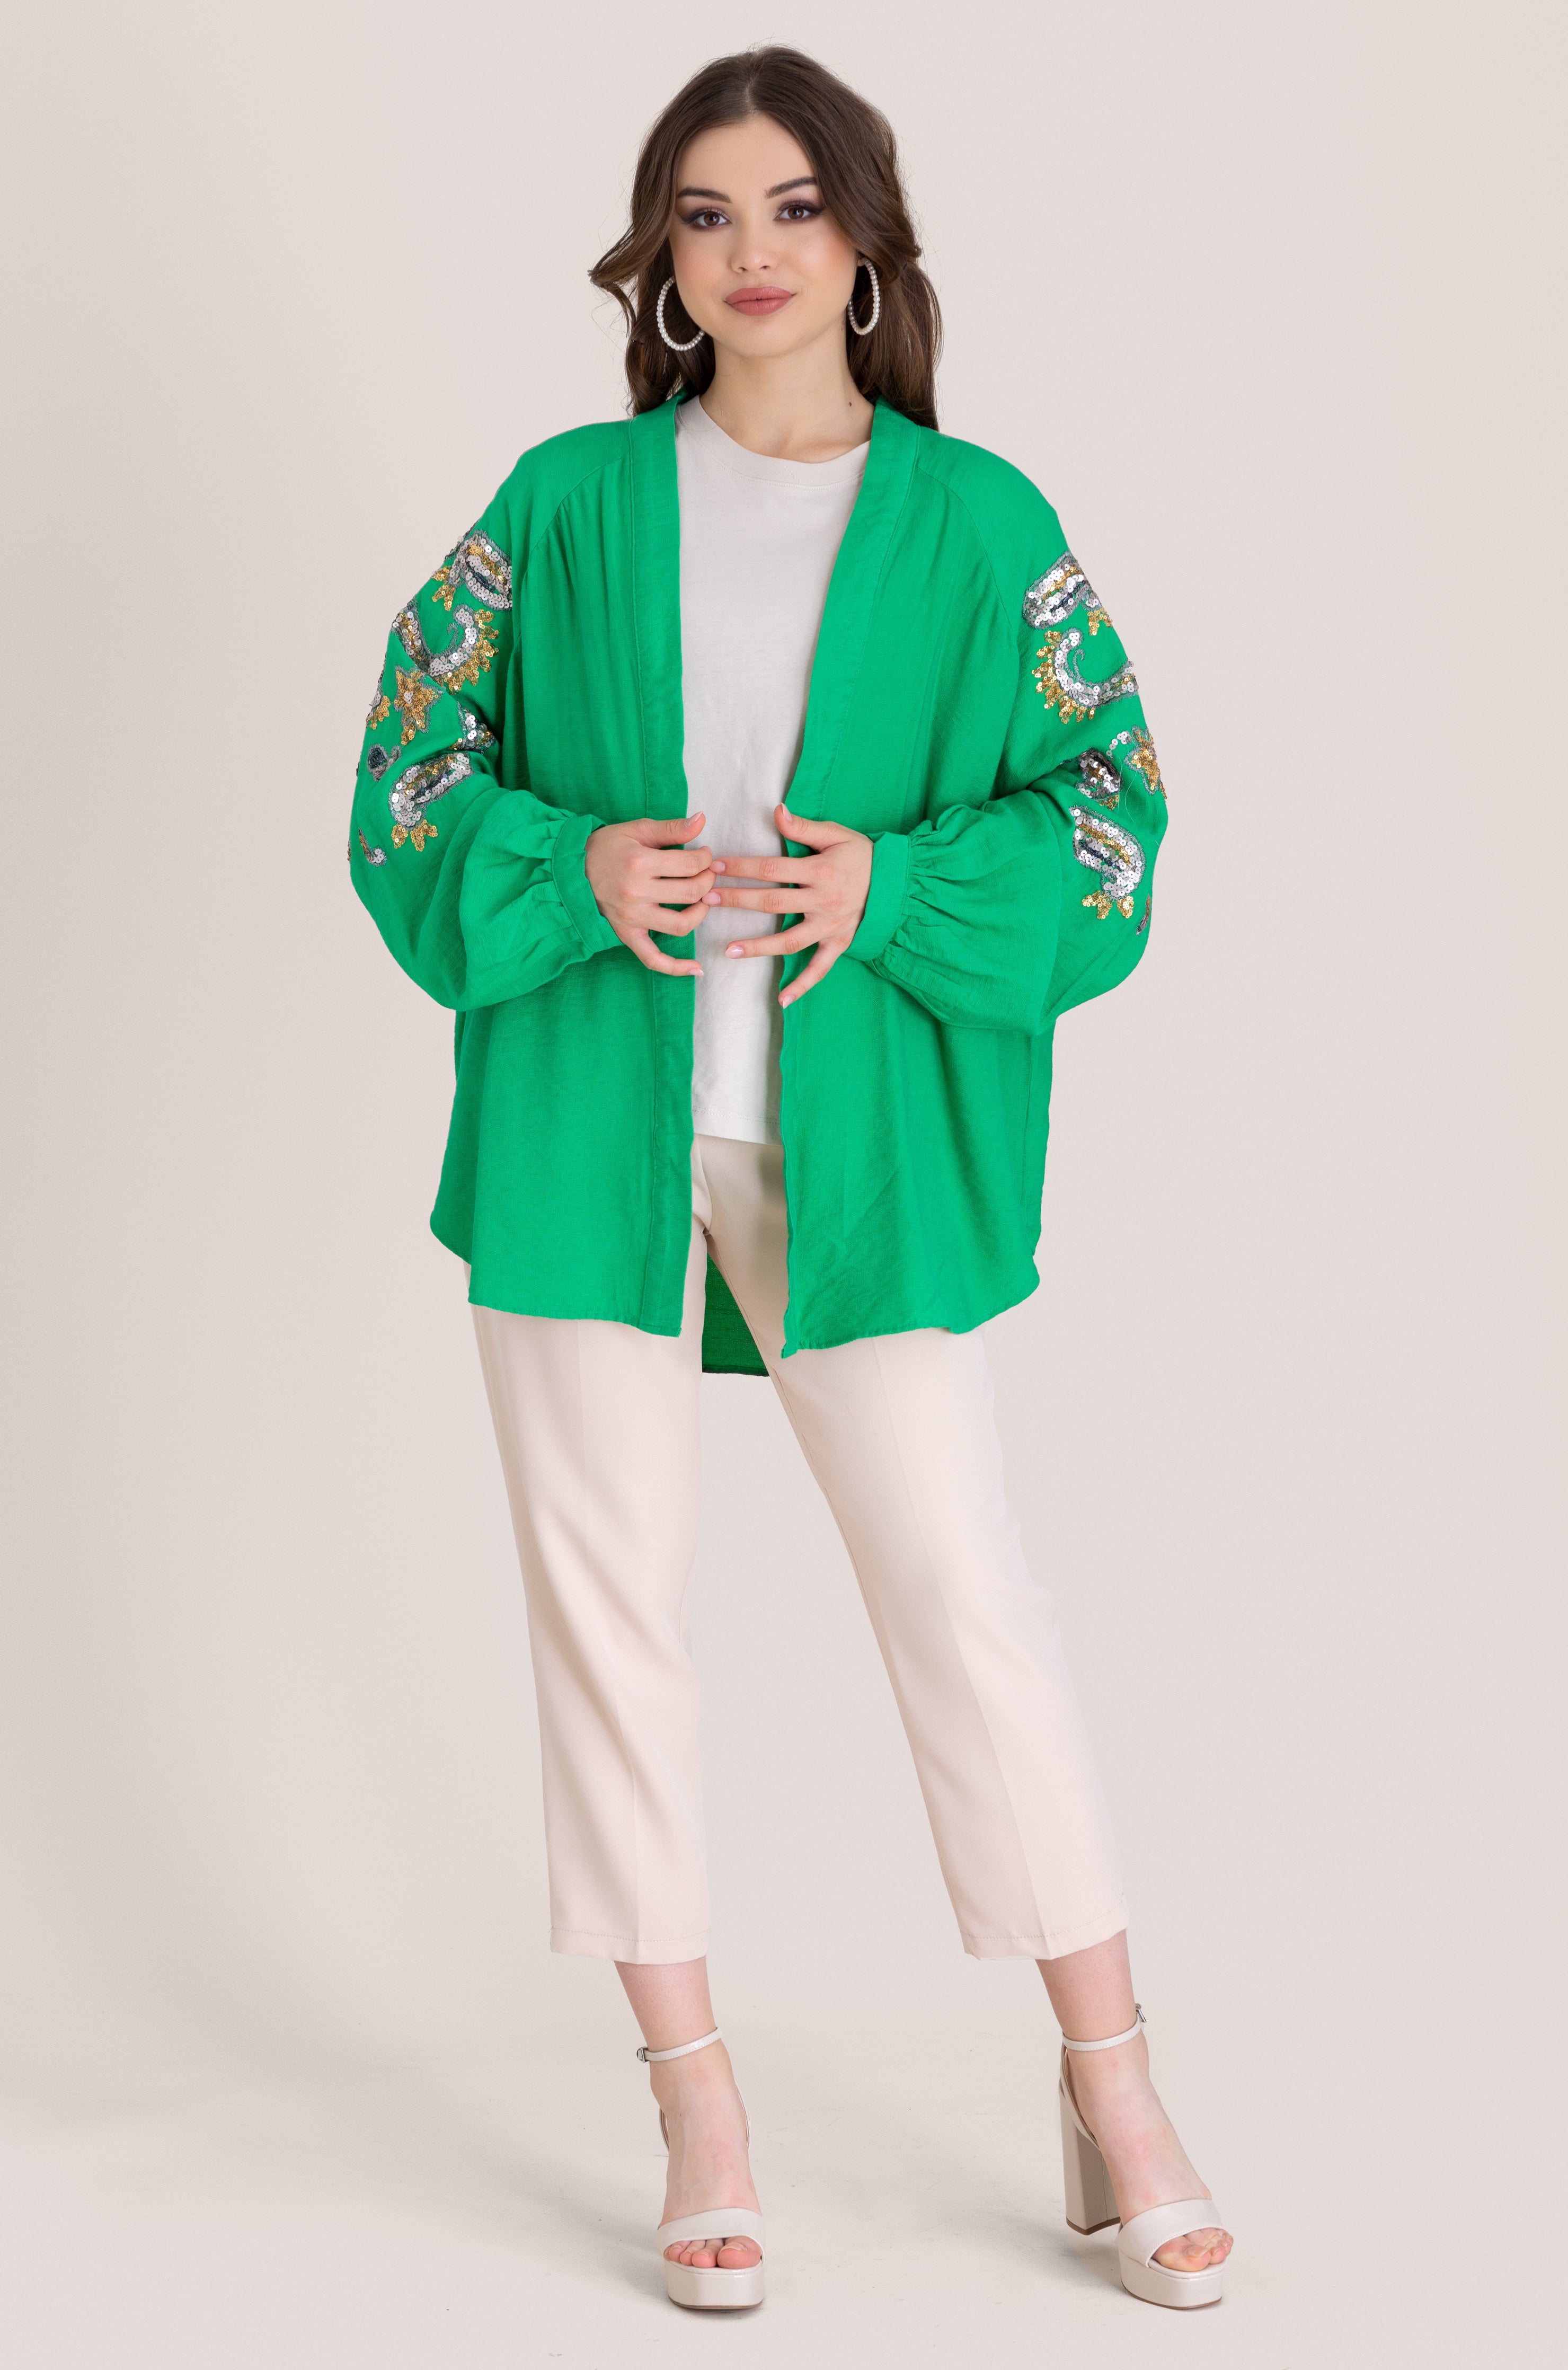 Embroidered Floral Cardigan - Green